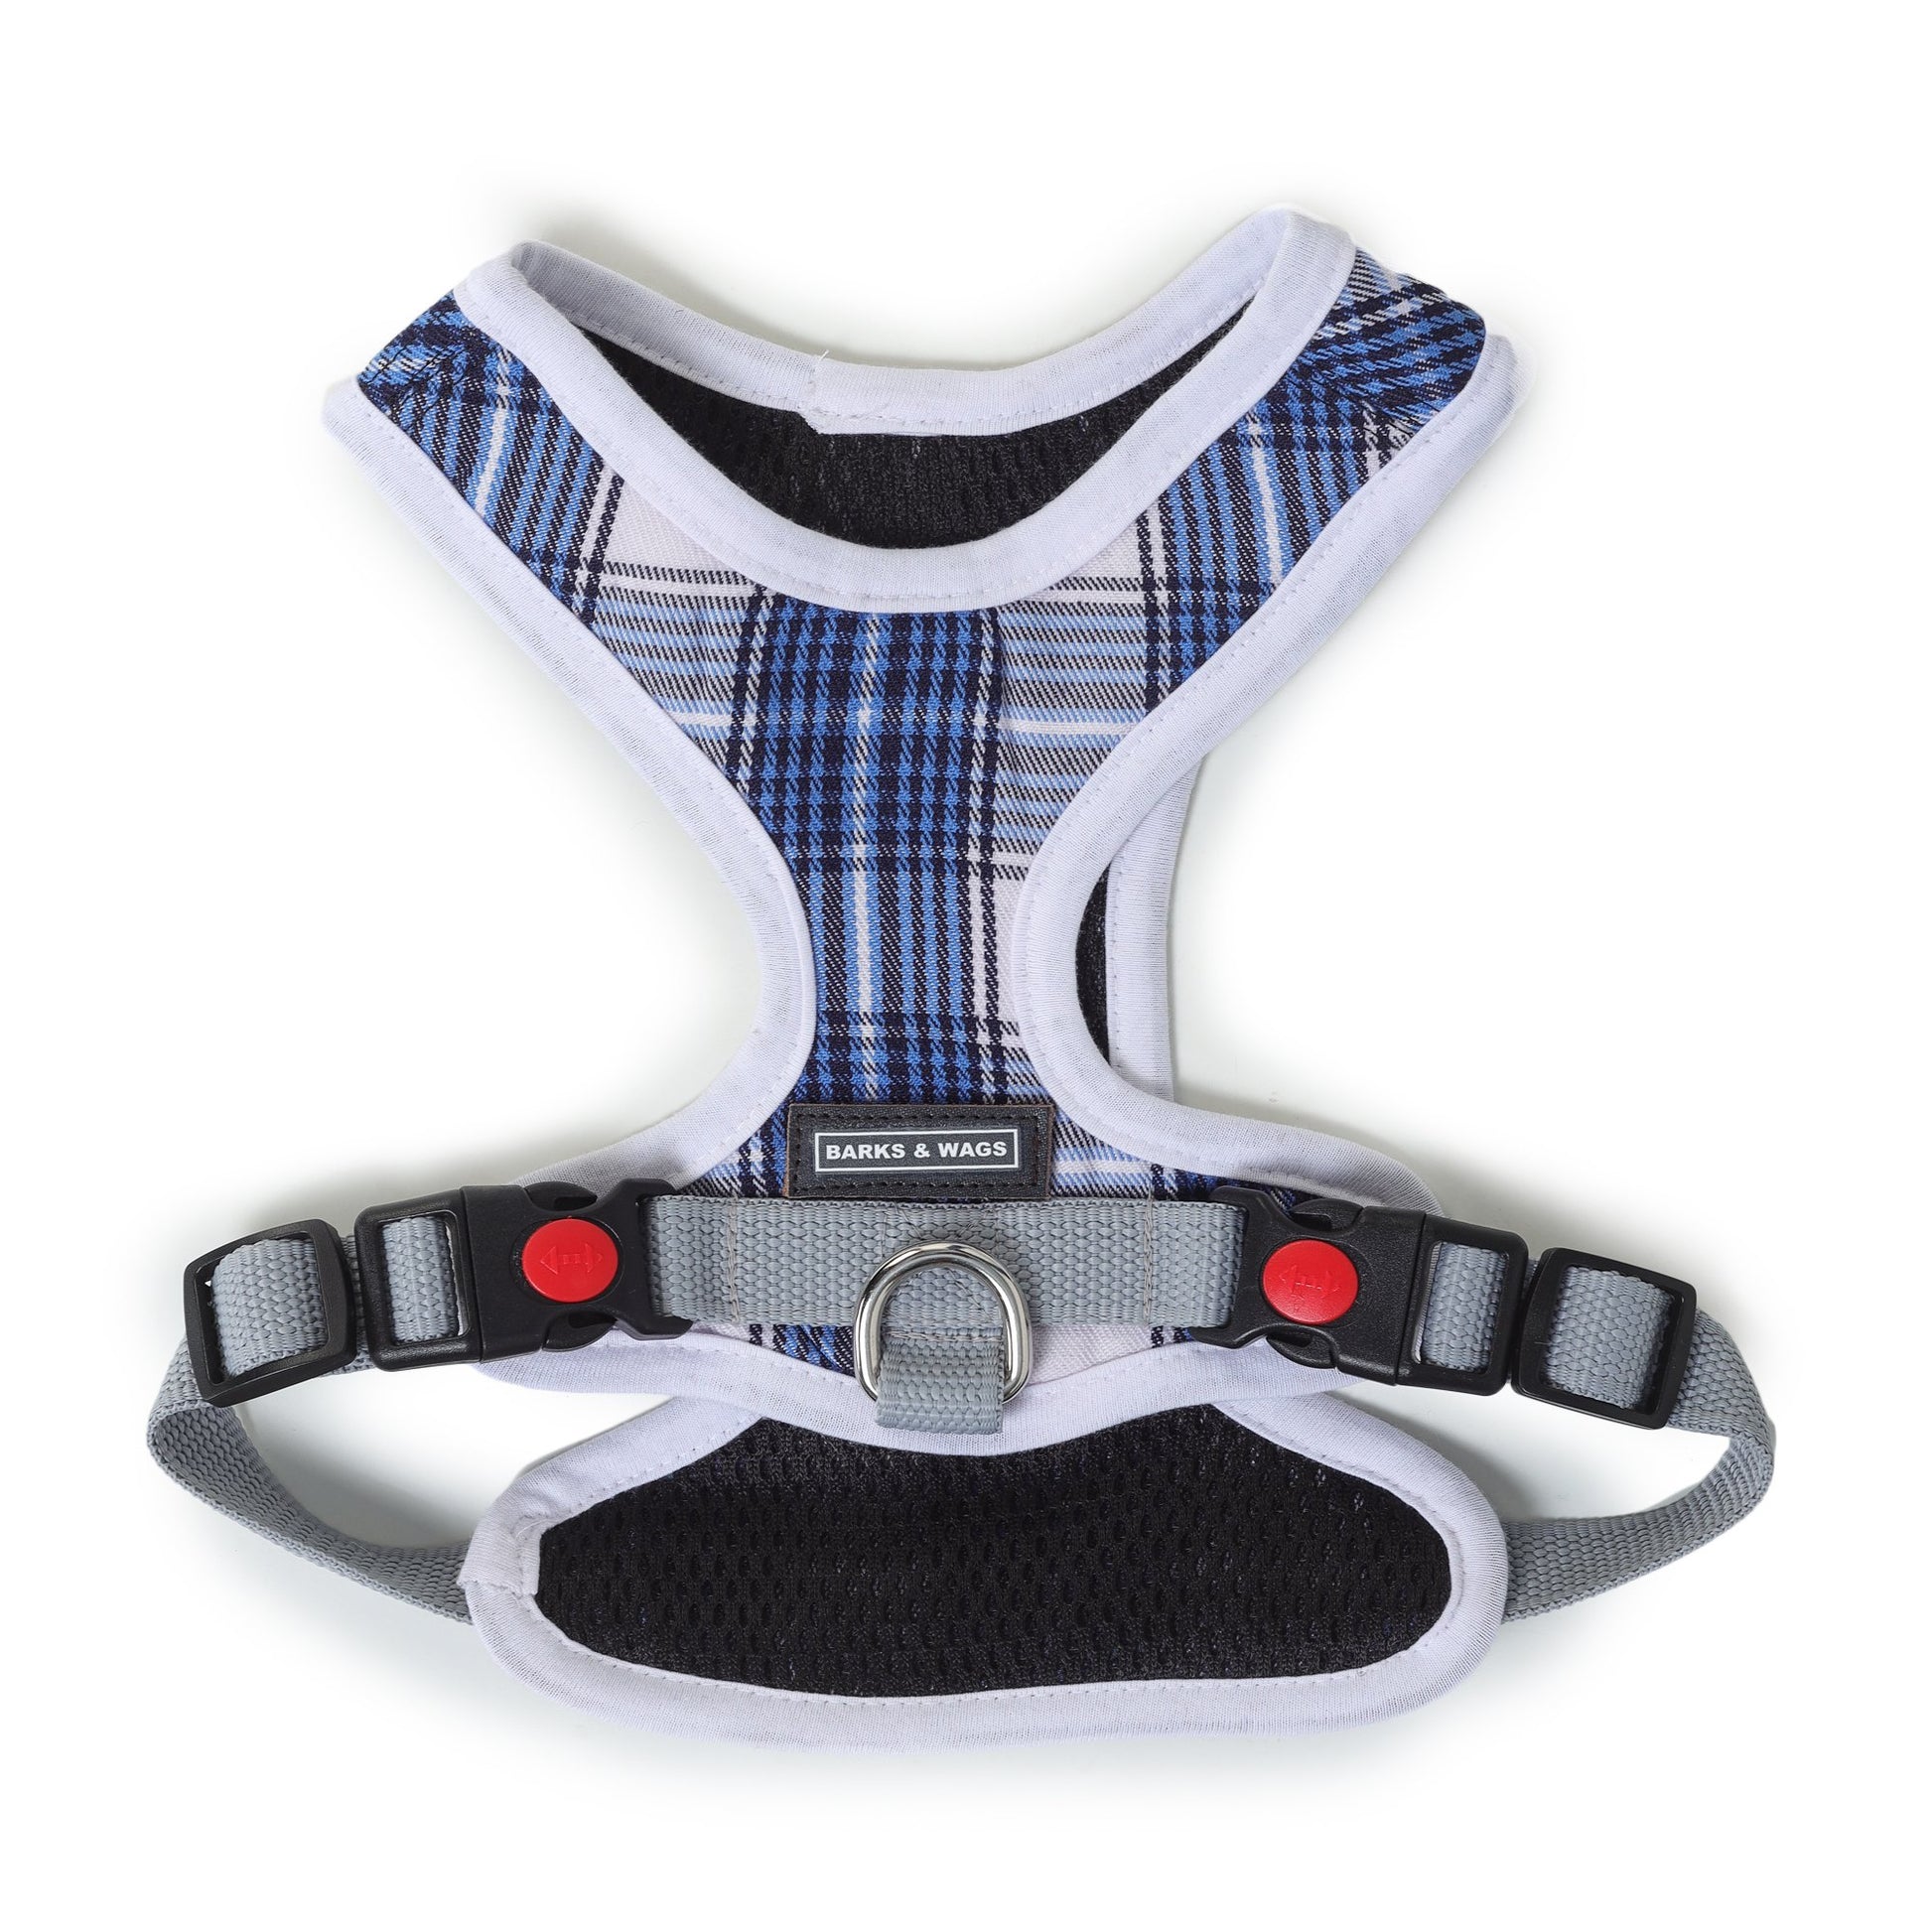 back side of harness and leash for dogs by Barks & Wags